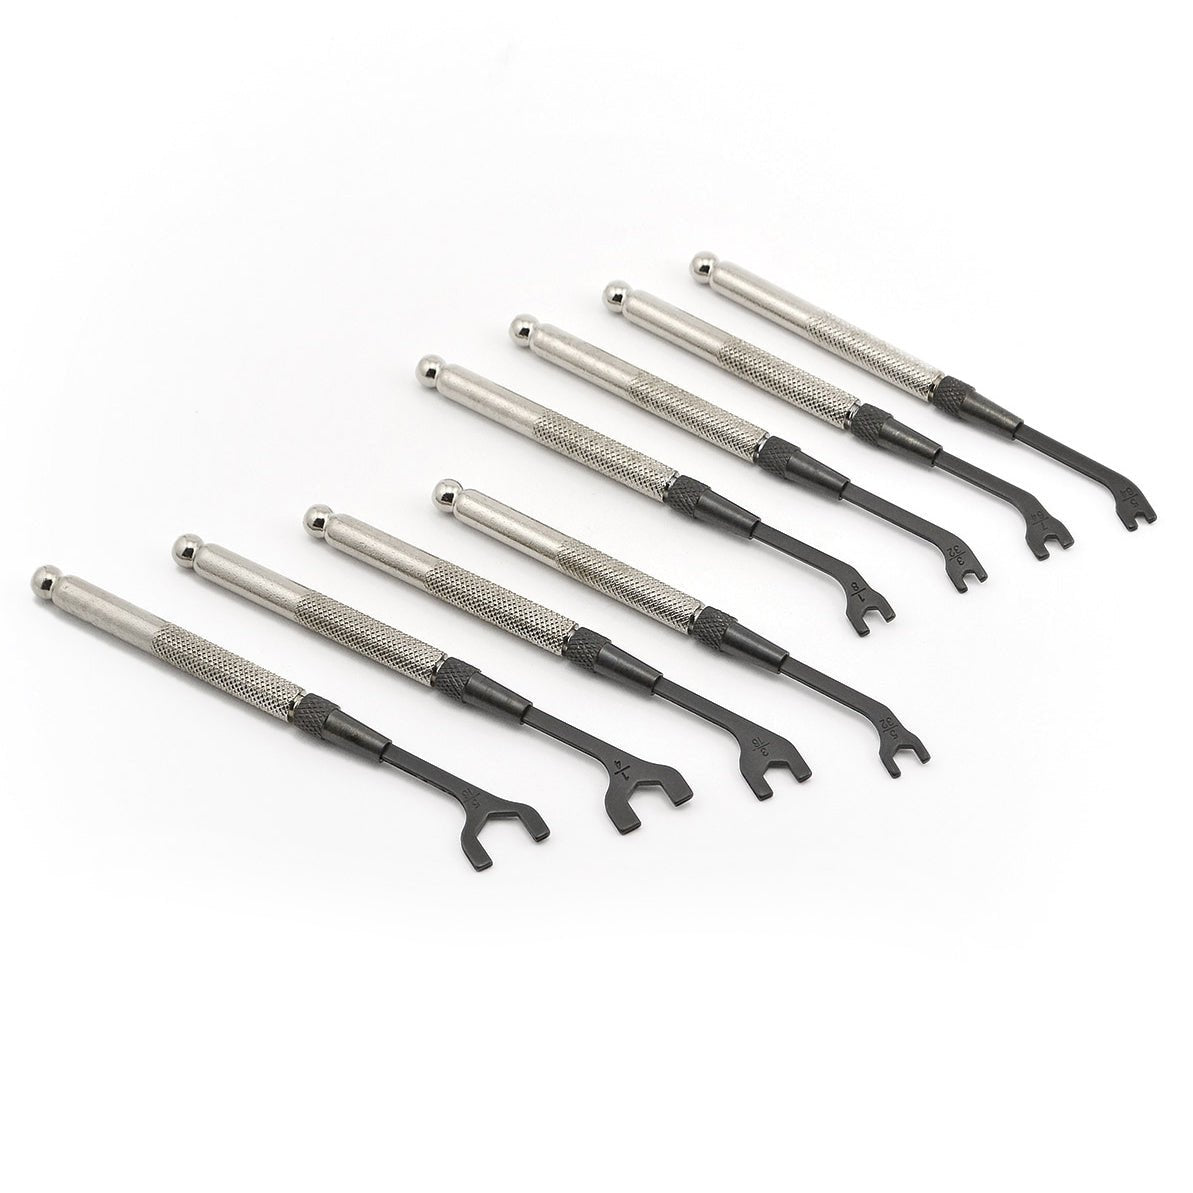 8 - piece Open Ended Wrench Inch Set